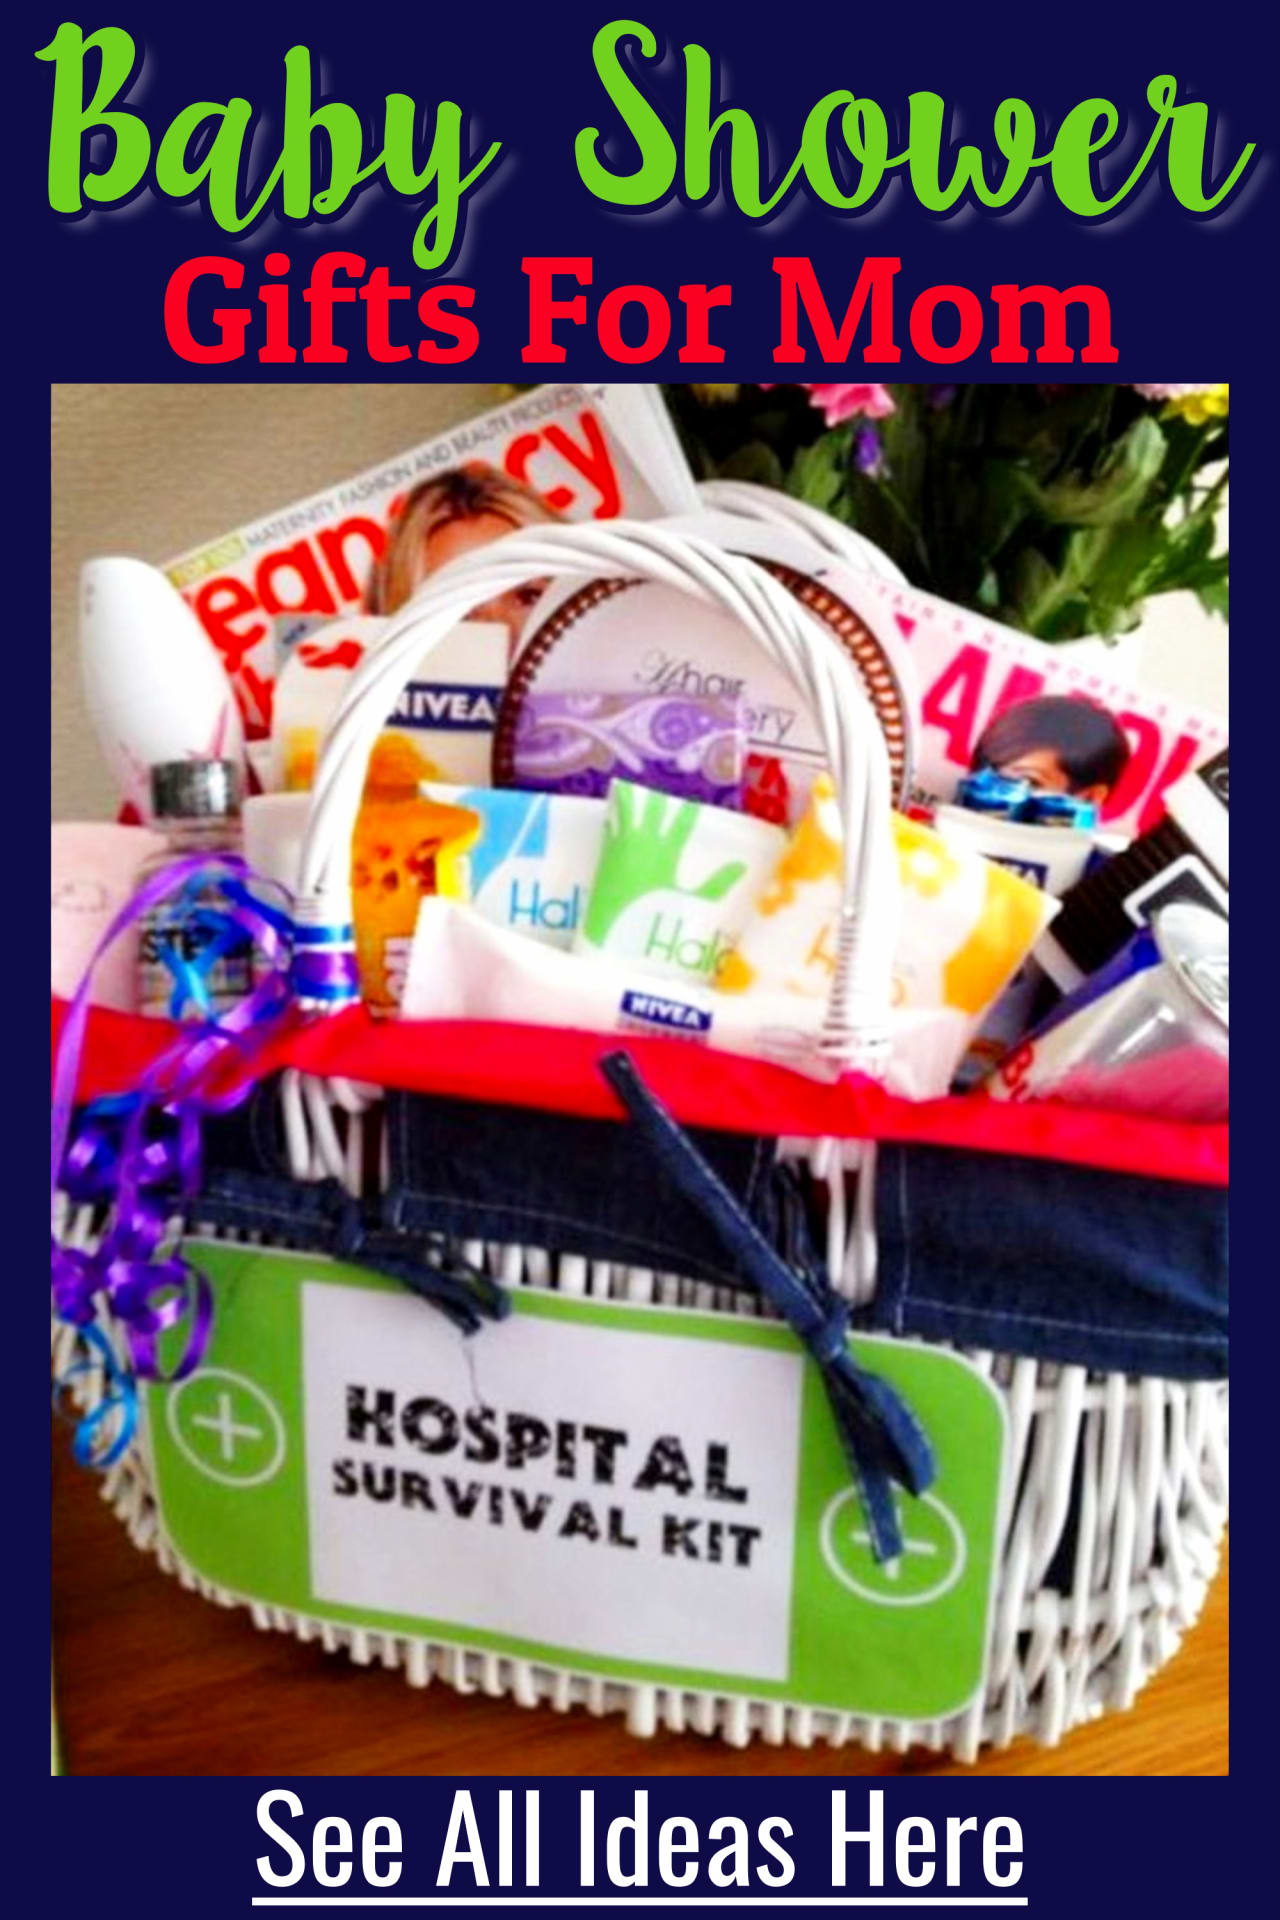 Baby shower gift ideas - baby shower gifts for Mom - New Mommy survival kits, care packages and more for the new mom